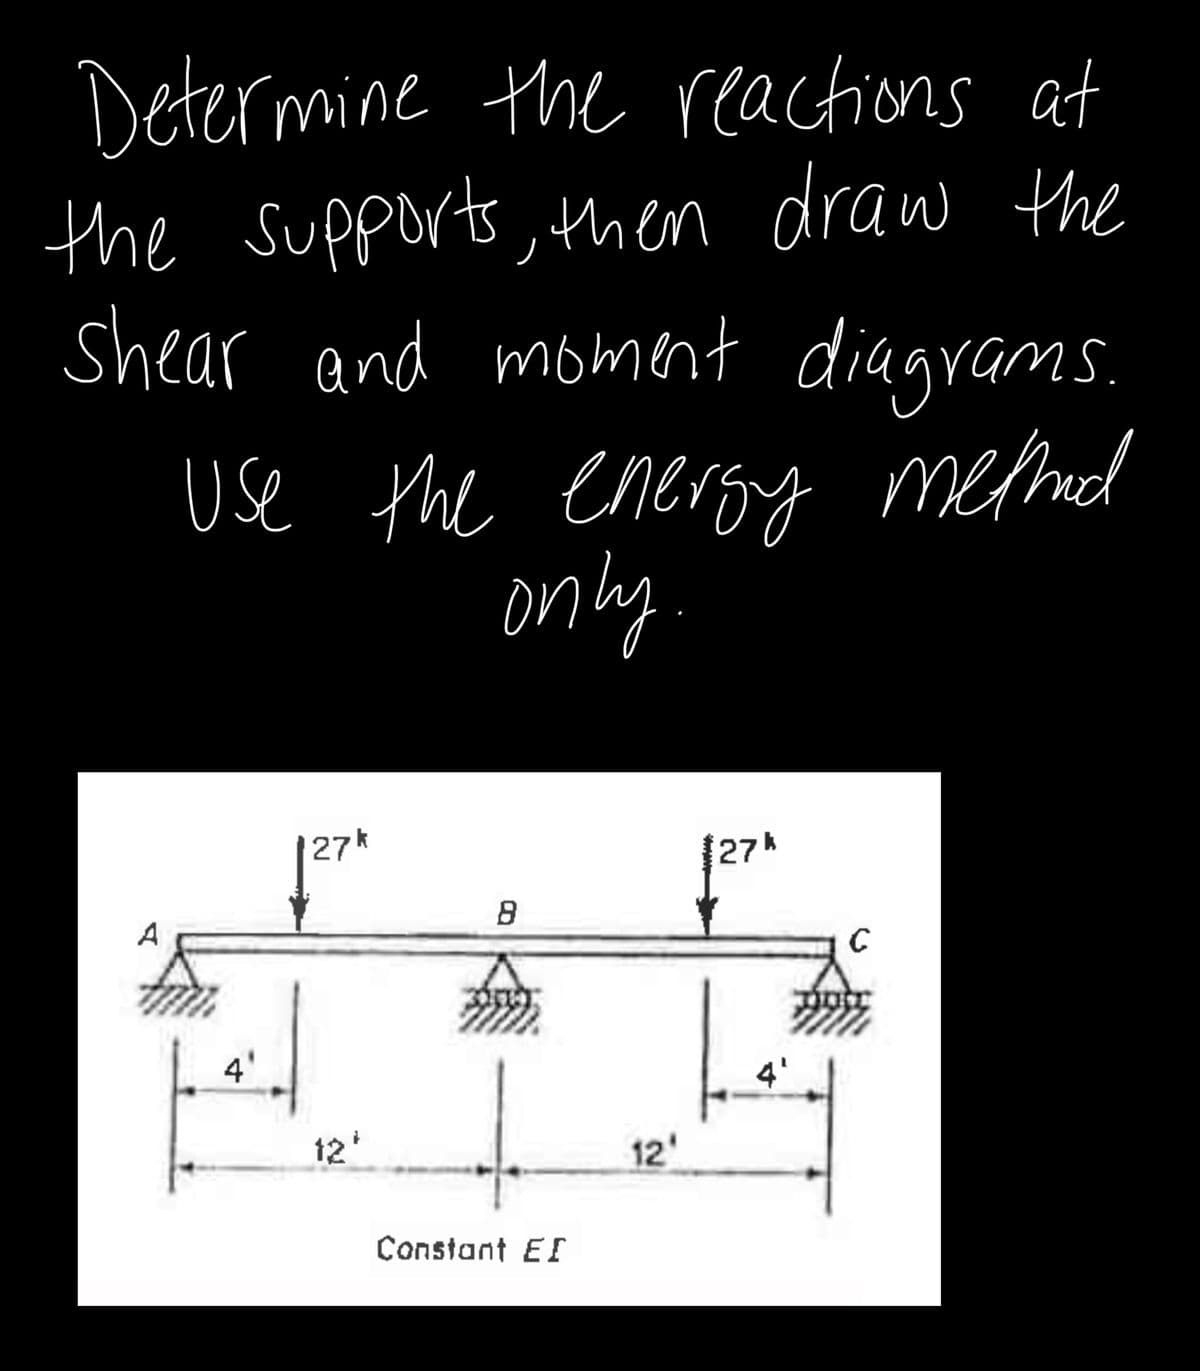 Determine the reactions at
the Supports, then draw the
shear and moment diagrams.
Use the energy metned
only.
27k
27h
4'
12'
12'
Constant EI
